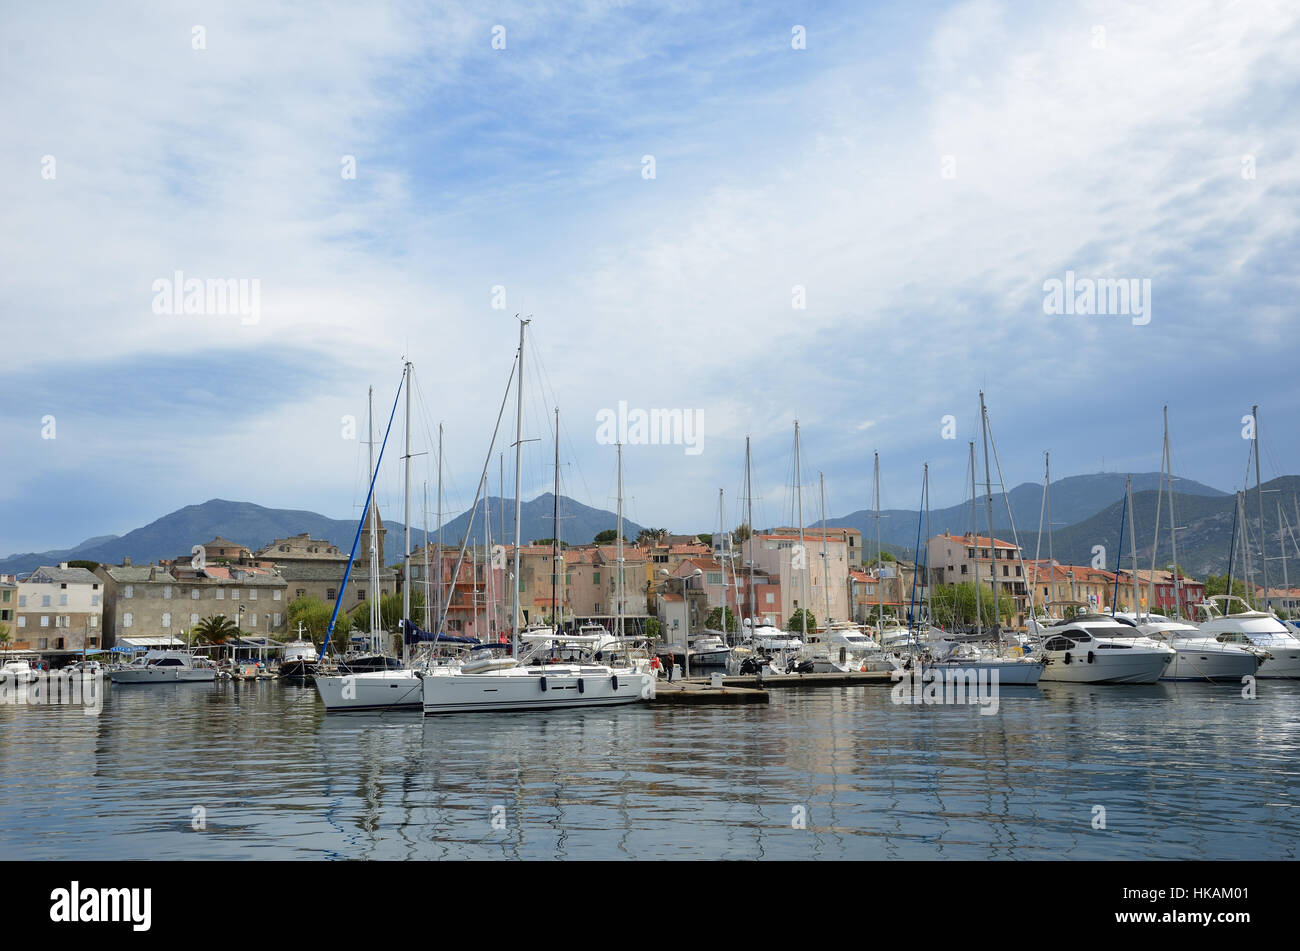 Saint-Florent is a fishing port located near the gulf of the same name. Today, it is a popular summer vacation spot for many tourists for one of the m Stock Photo